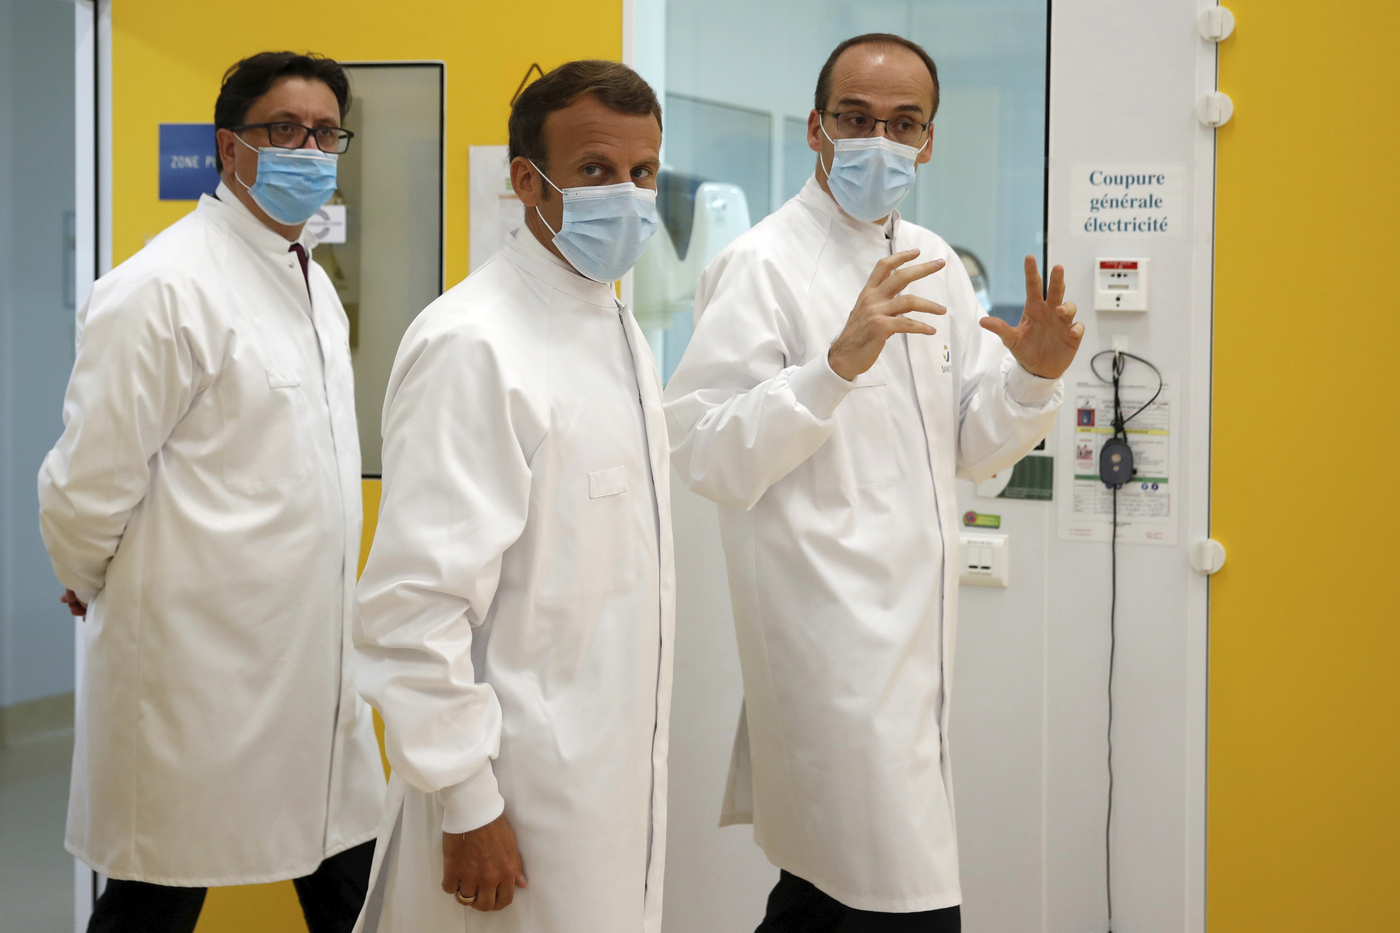 French President Emmanuel Macron, center, Thomas Triomphe, right, Executive Vice President of Sanofi Pasteur, and Paul Hudson, Chief Executive Officer of Sanofi, visits an industrial development laboratory at the French drugmaker's vaccine unit Sanofi Pasteur plant in Marcy-l'Etoile, near Lyon, central France, Tuesday, June 16, 2020. The visit comes after rival pharmaceutical company AstraZeneca this weekend announced a deal to supply 400 million vaccine doses to EU countries, including France. (Gonzalo Fuentes/Pool via AP)